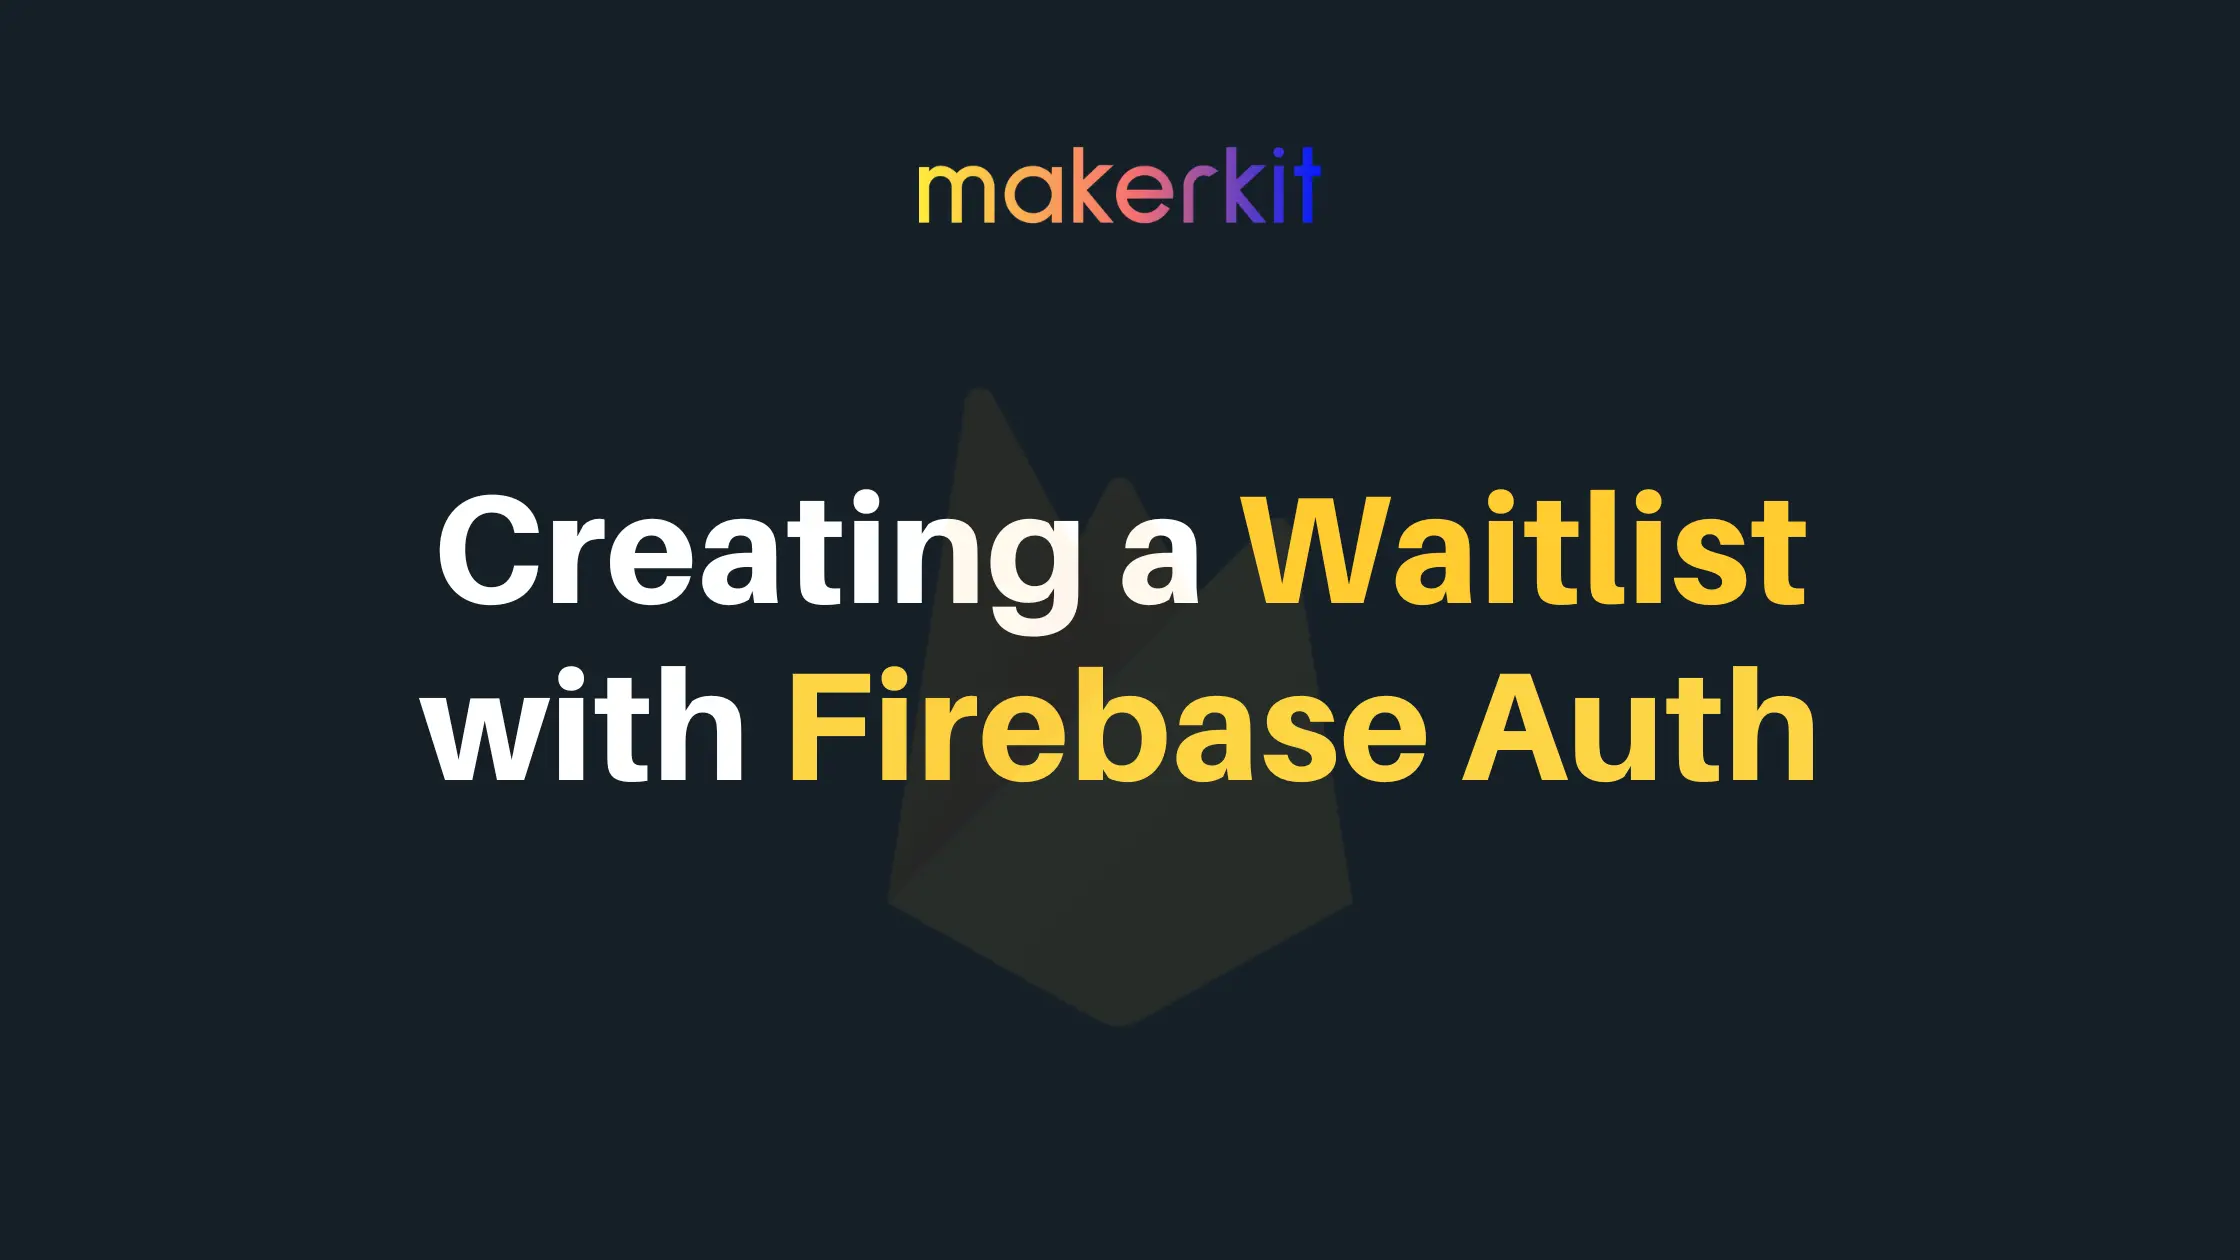 Cover Image for Creating a Waitlist with Firebase Auth